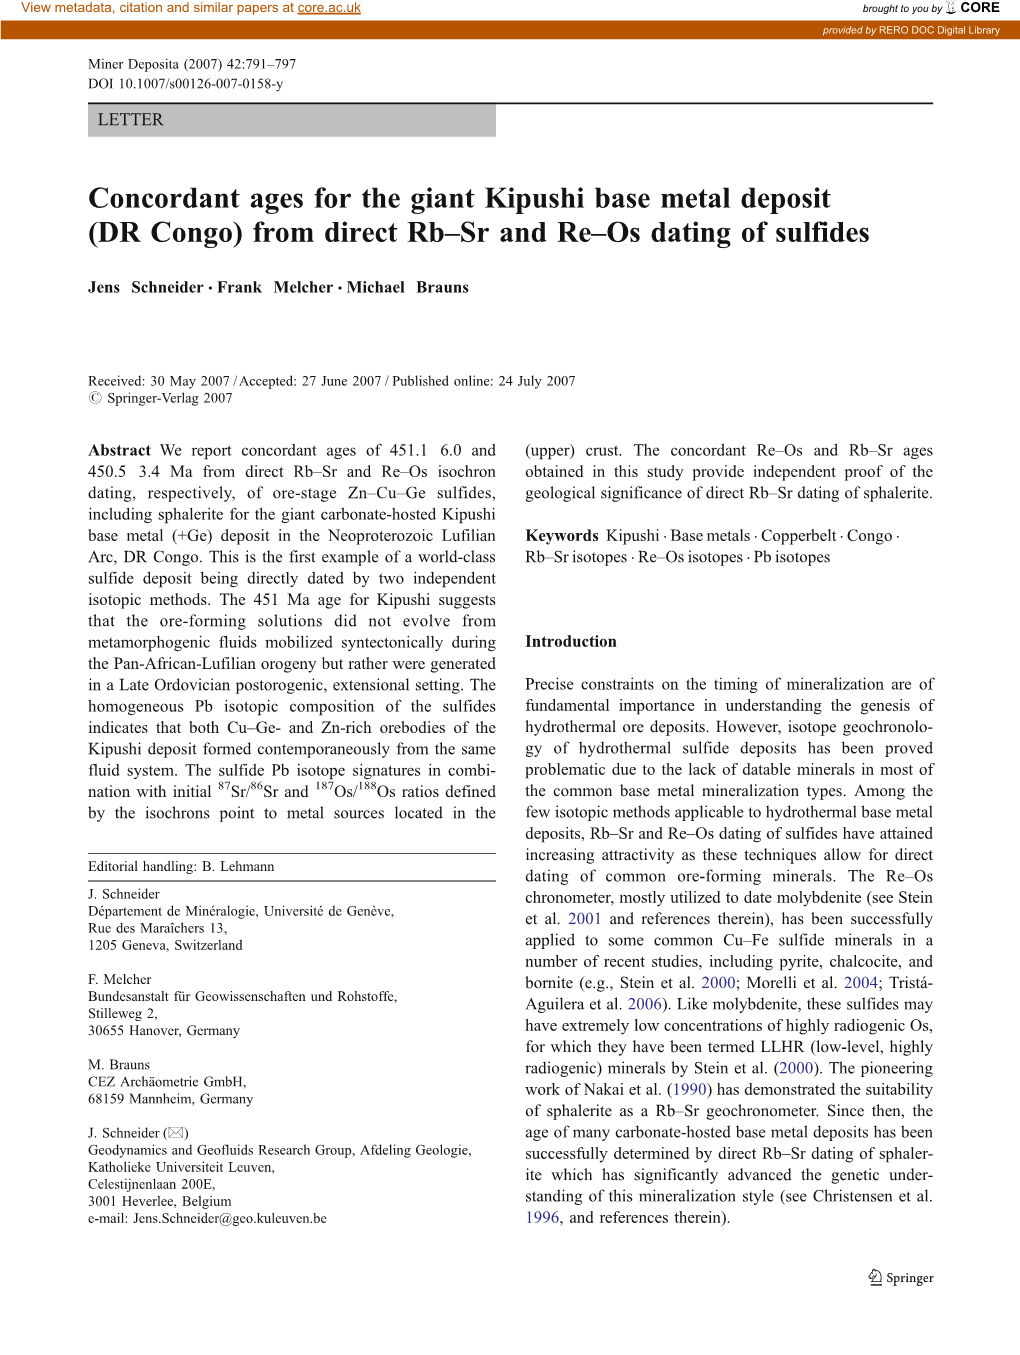 Concordant Ages for the Giant Kipushi Base Metal Deposit (DR Congo) from Direct Rb–Sr and Re–Os Dating of Sulfides